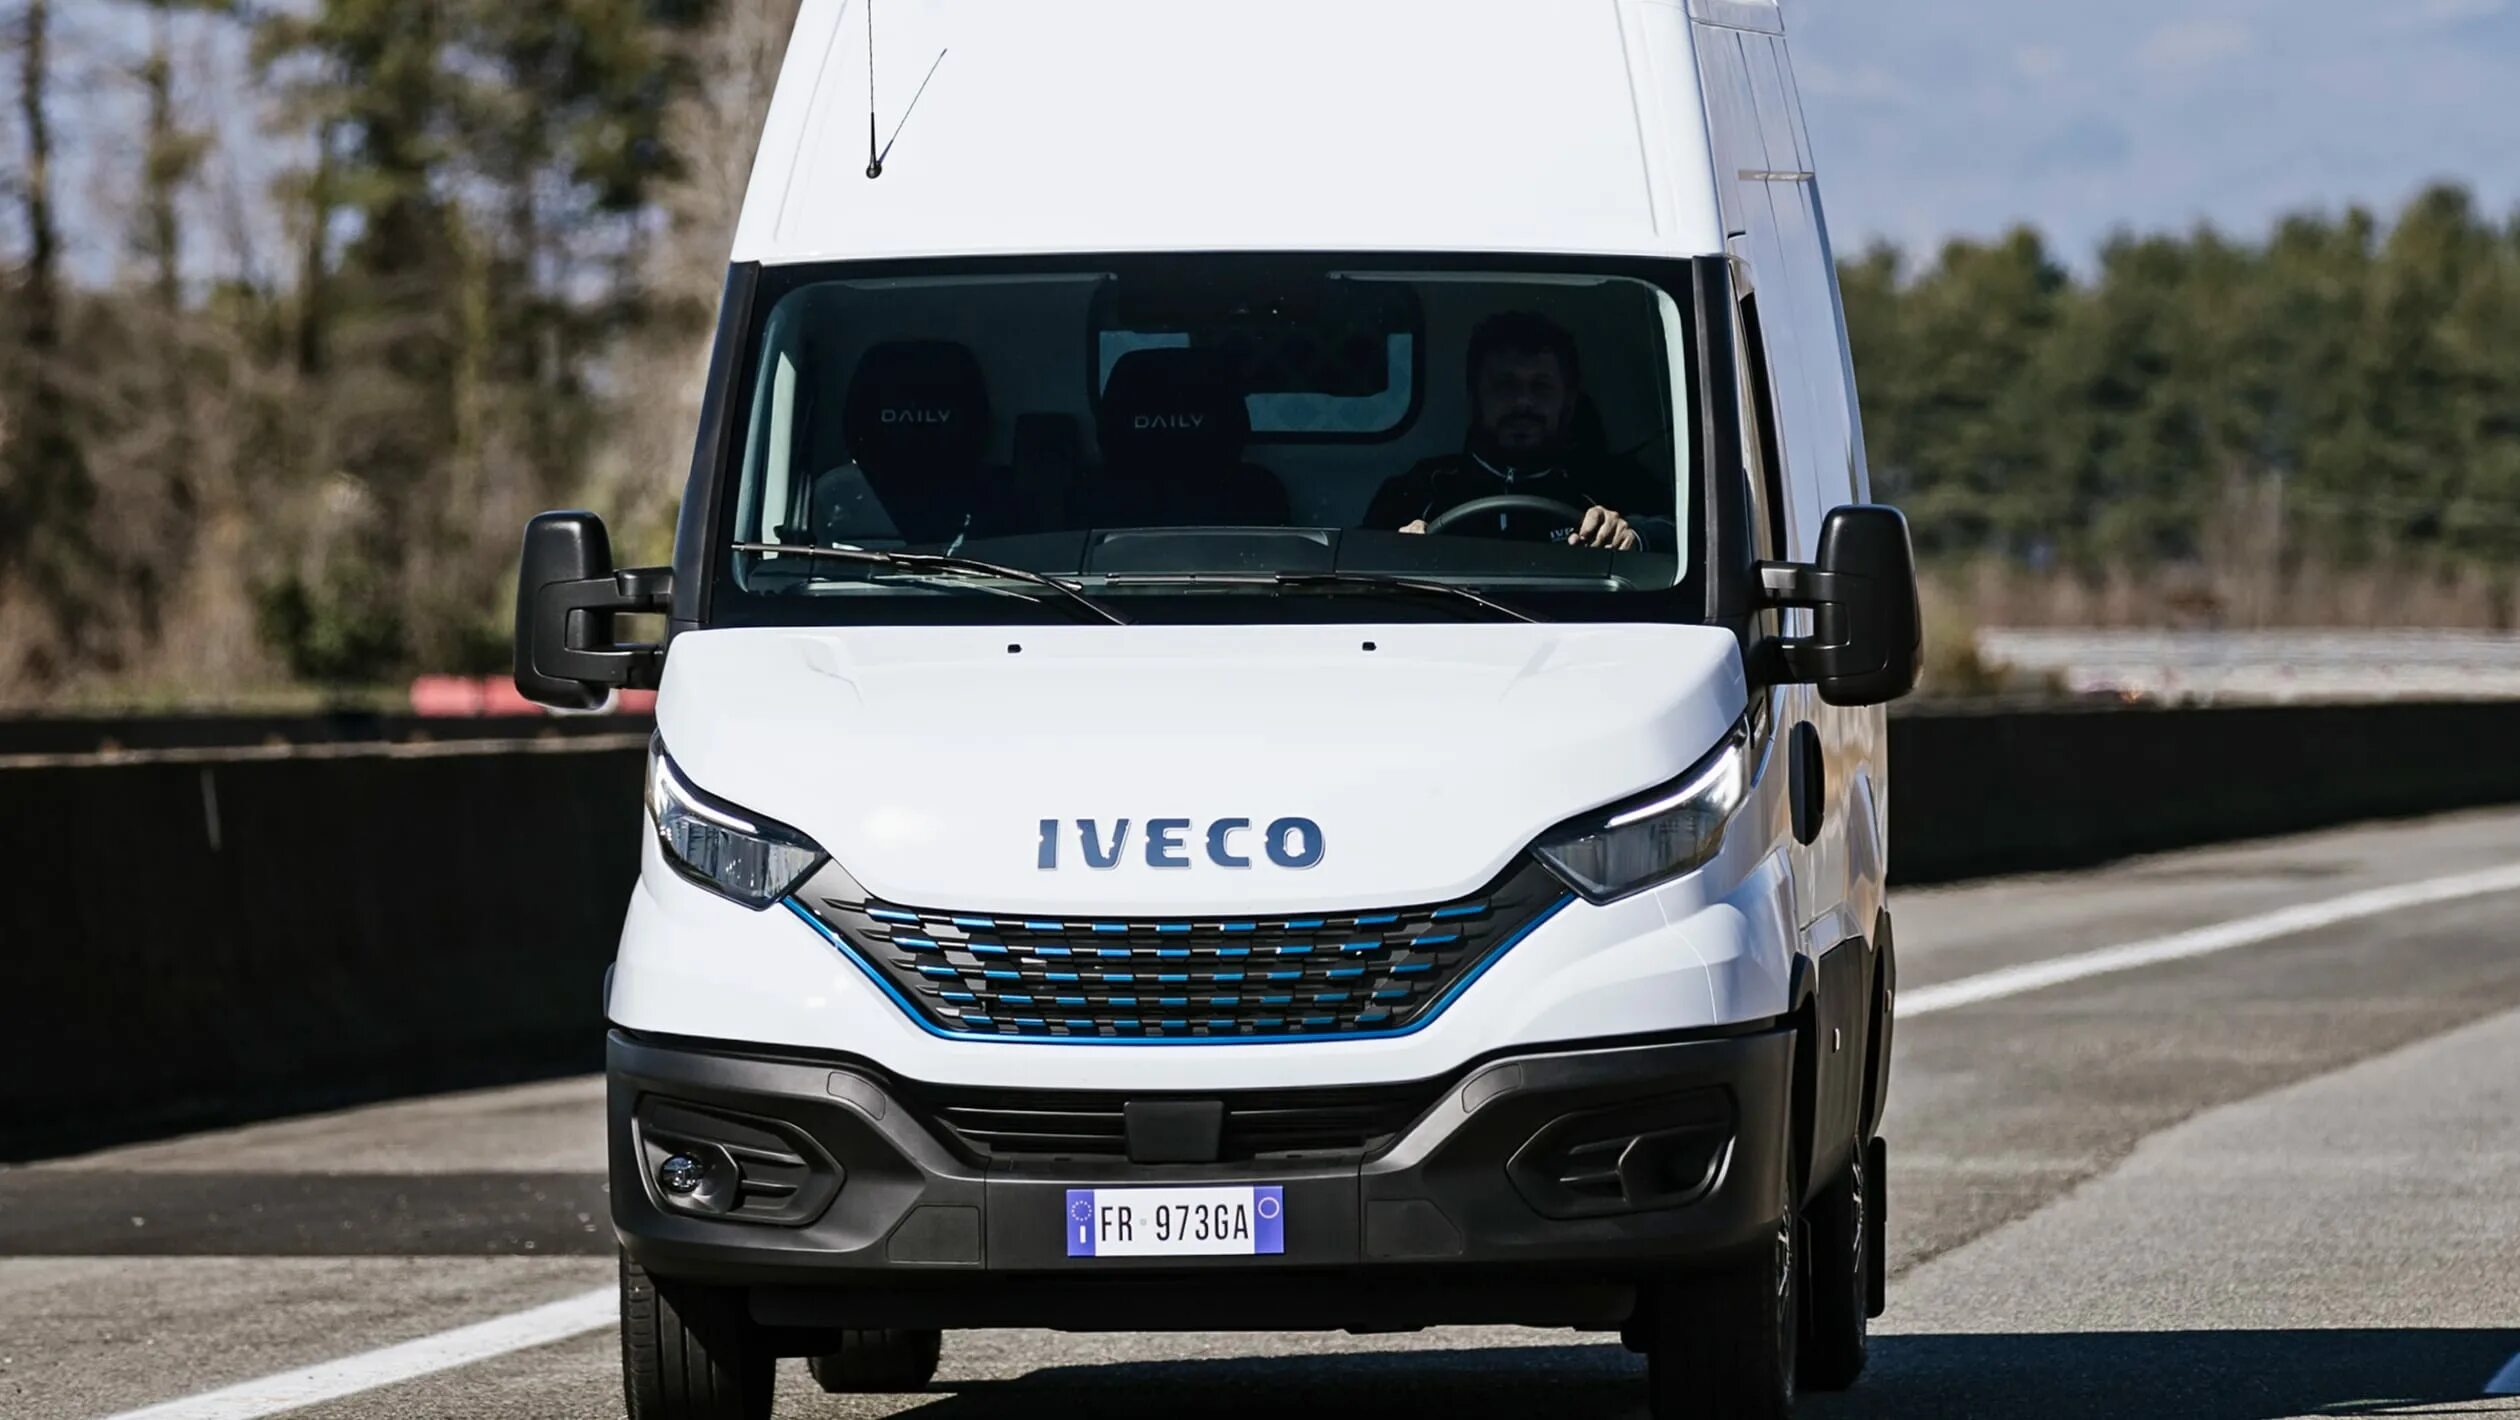 Iveco Daily 2019 фургон. Iveco Daily 2022. Ивеко Дейли 2015г. Ивеко Дейли 2022 года. Ивеко дейли 2019